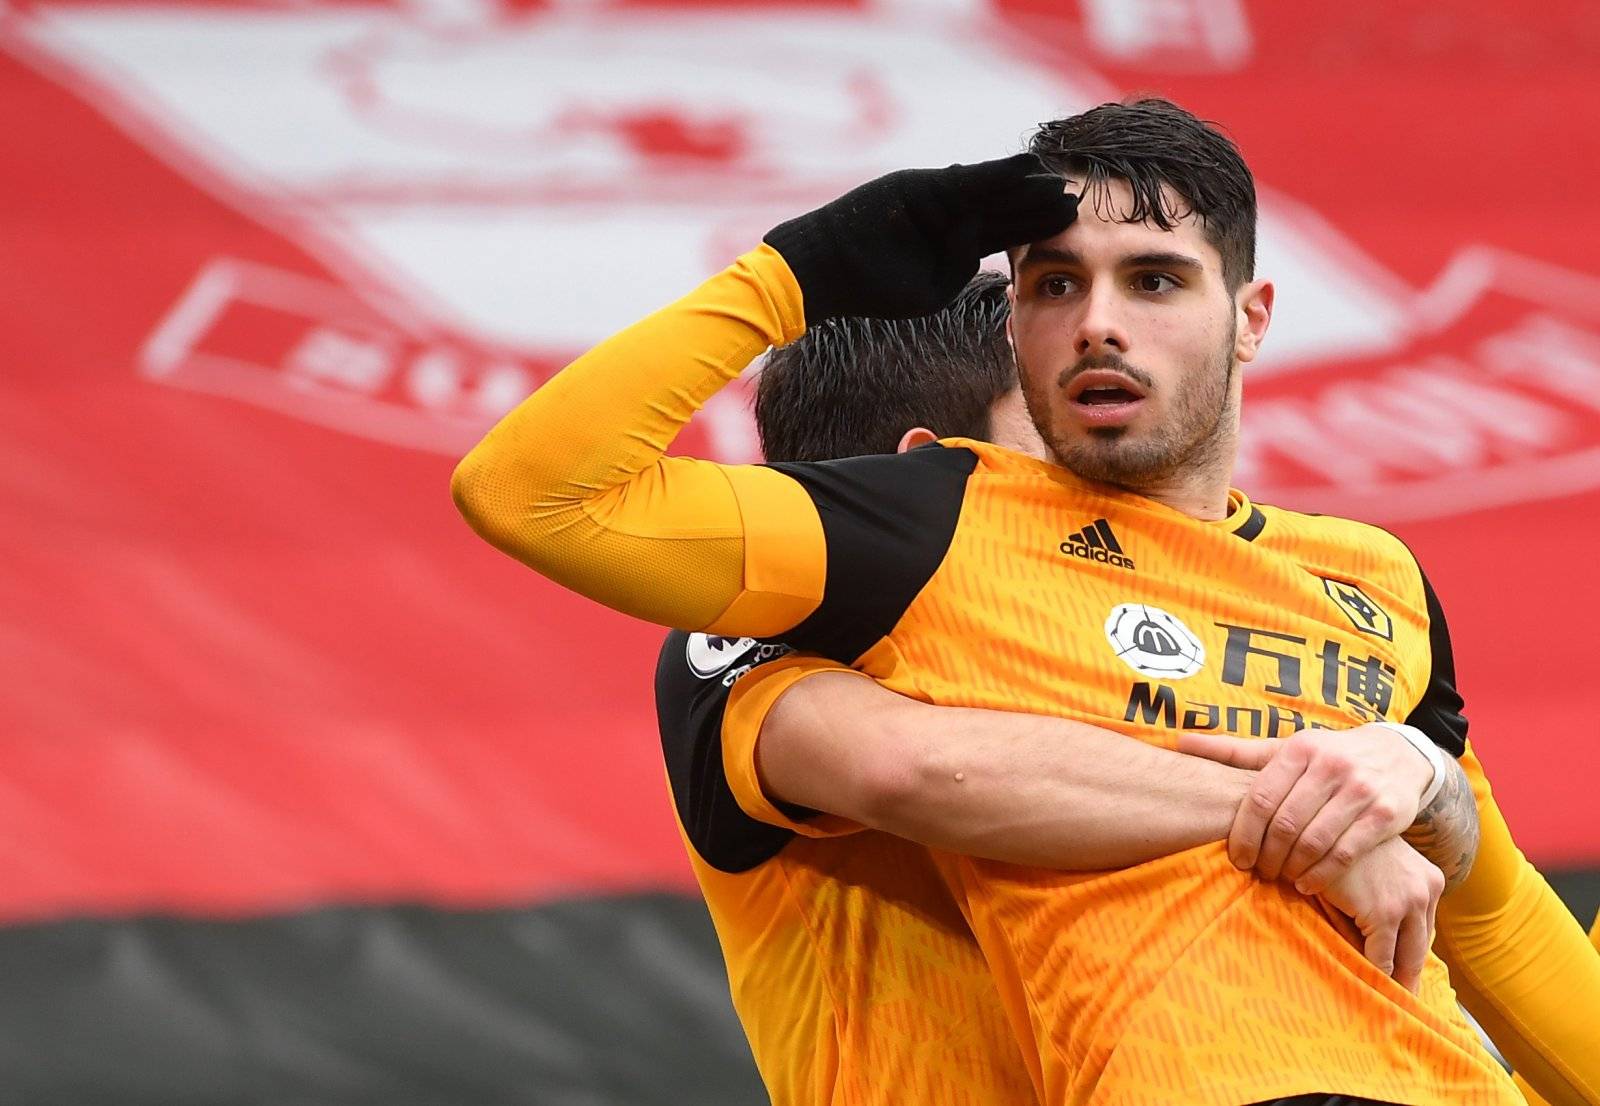 Wolves: Dinnery gives 'good news' verdict on Pedro Neto injury - Podcasts